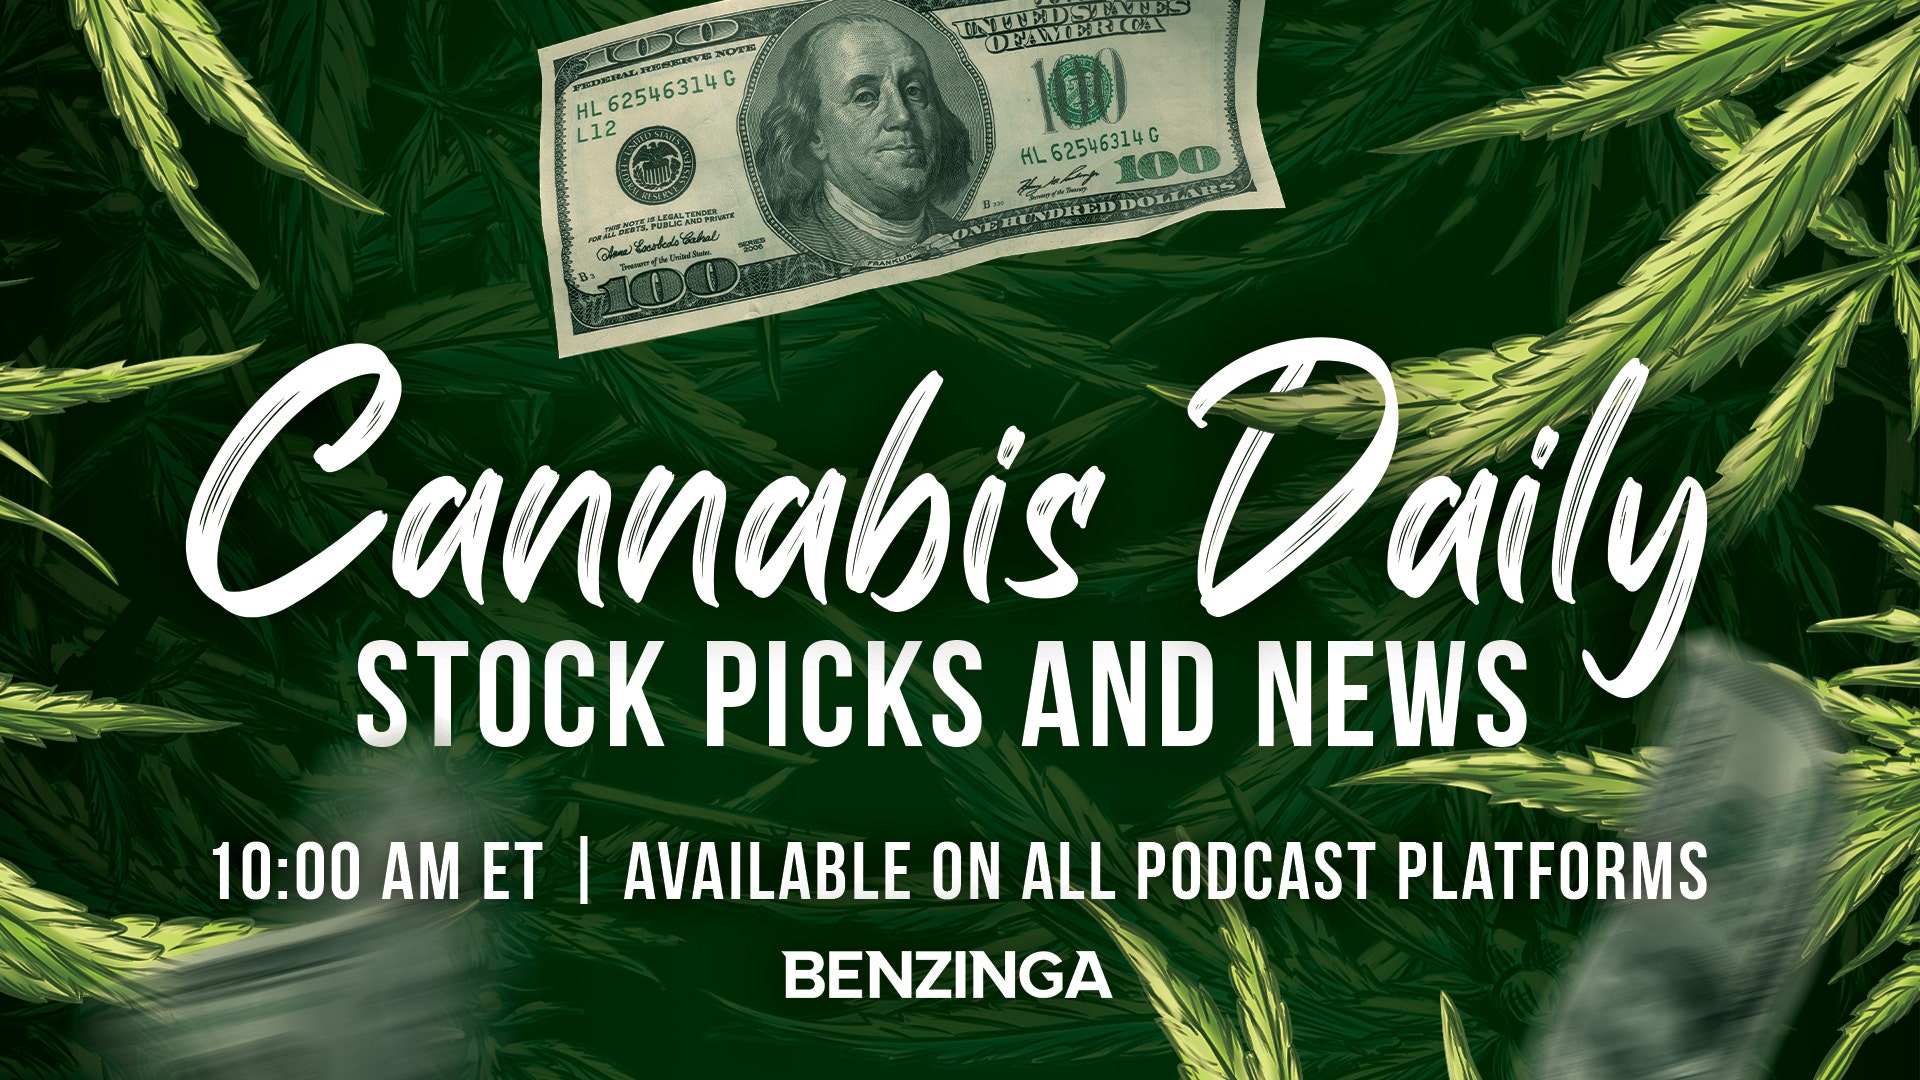 SNDL Stock Surges! Americans Getting High With Their Grandparents, New Thanksgiving Tradition? – Cannabis Daily November 12, 2021